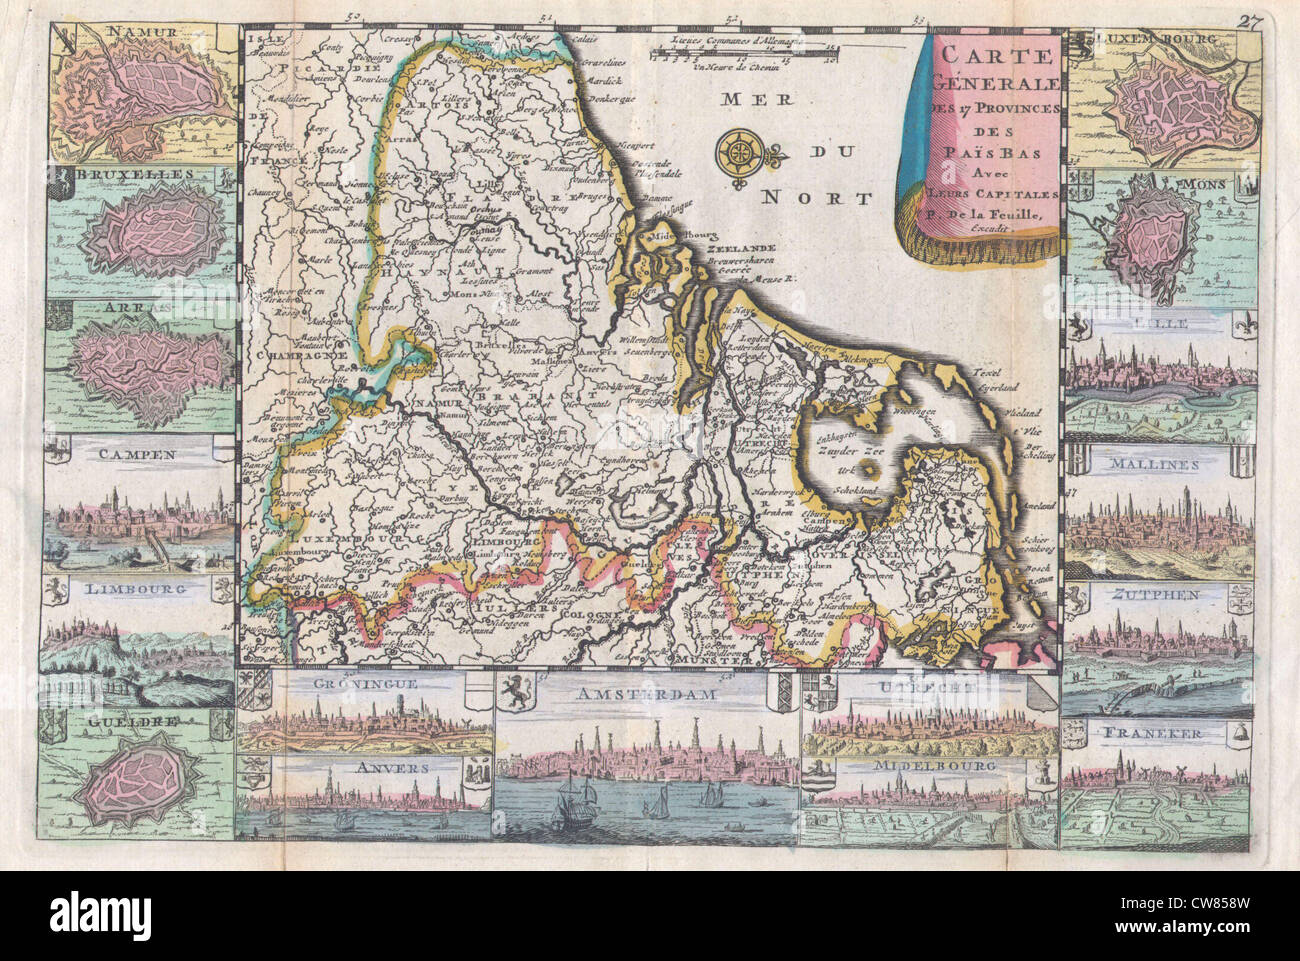 1710 De La Feuille Map of the Netherlands, Belgium and Luxembourg Stock Photo